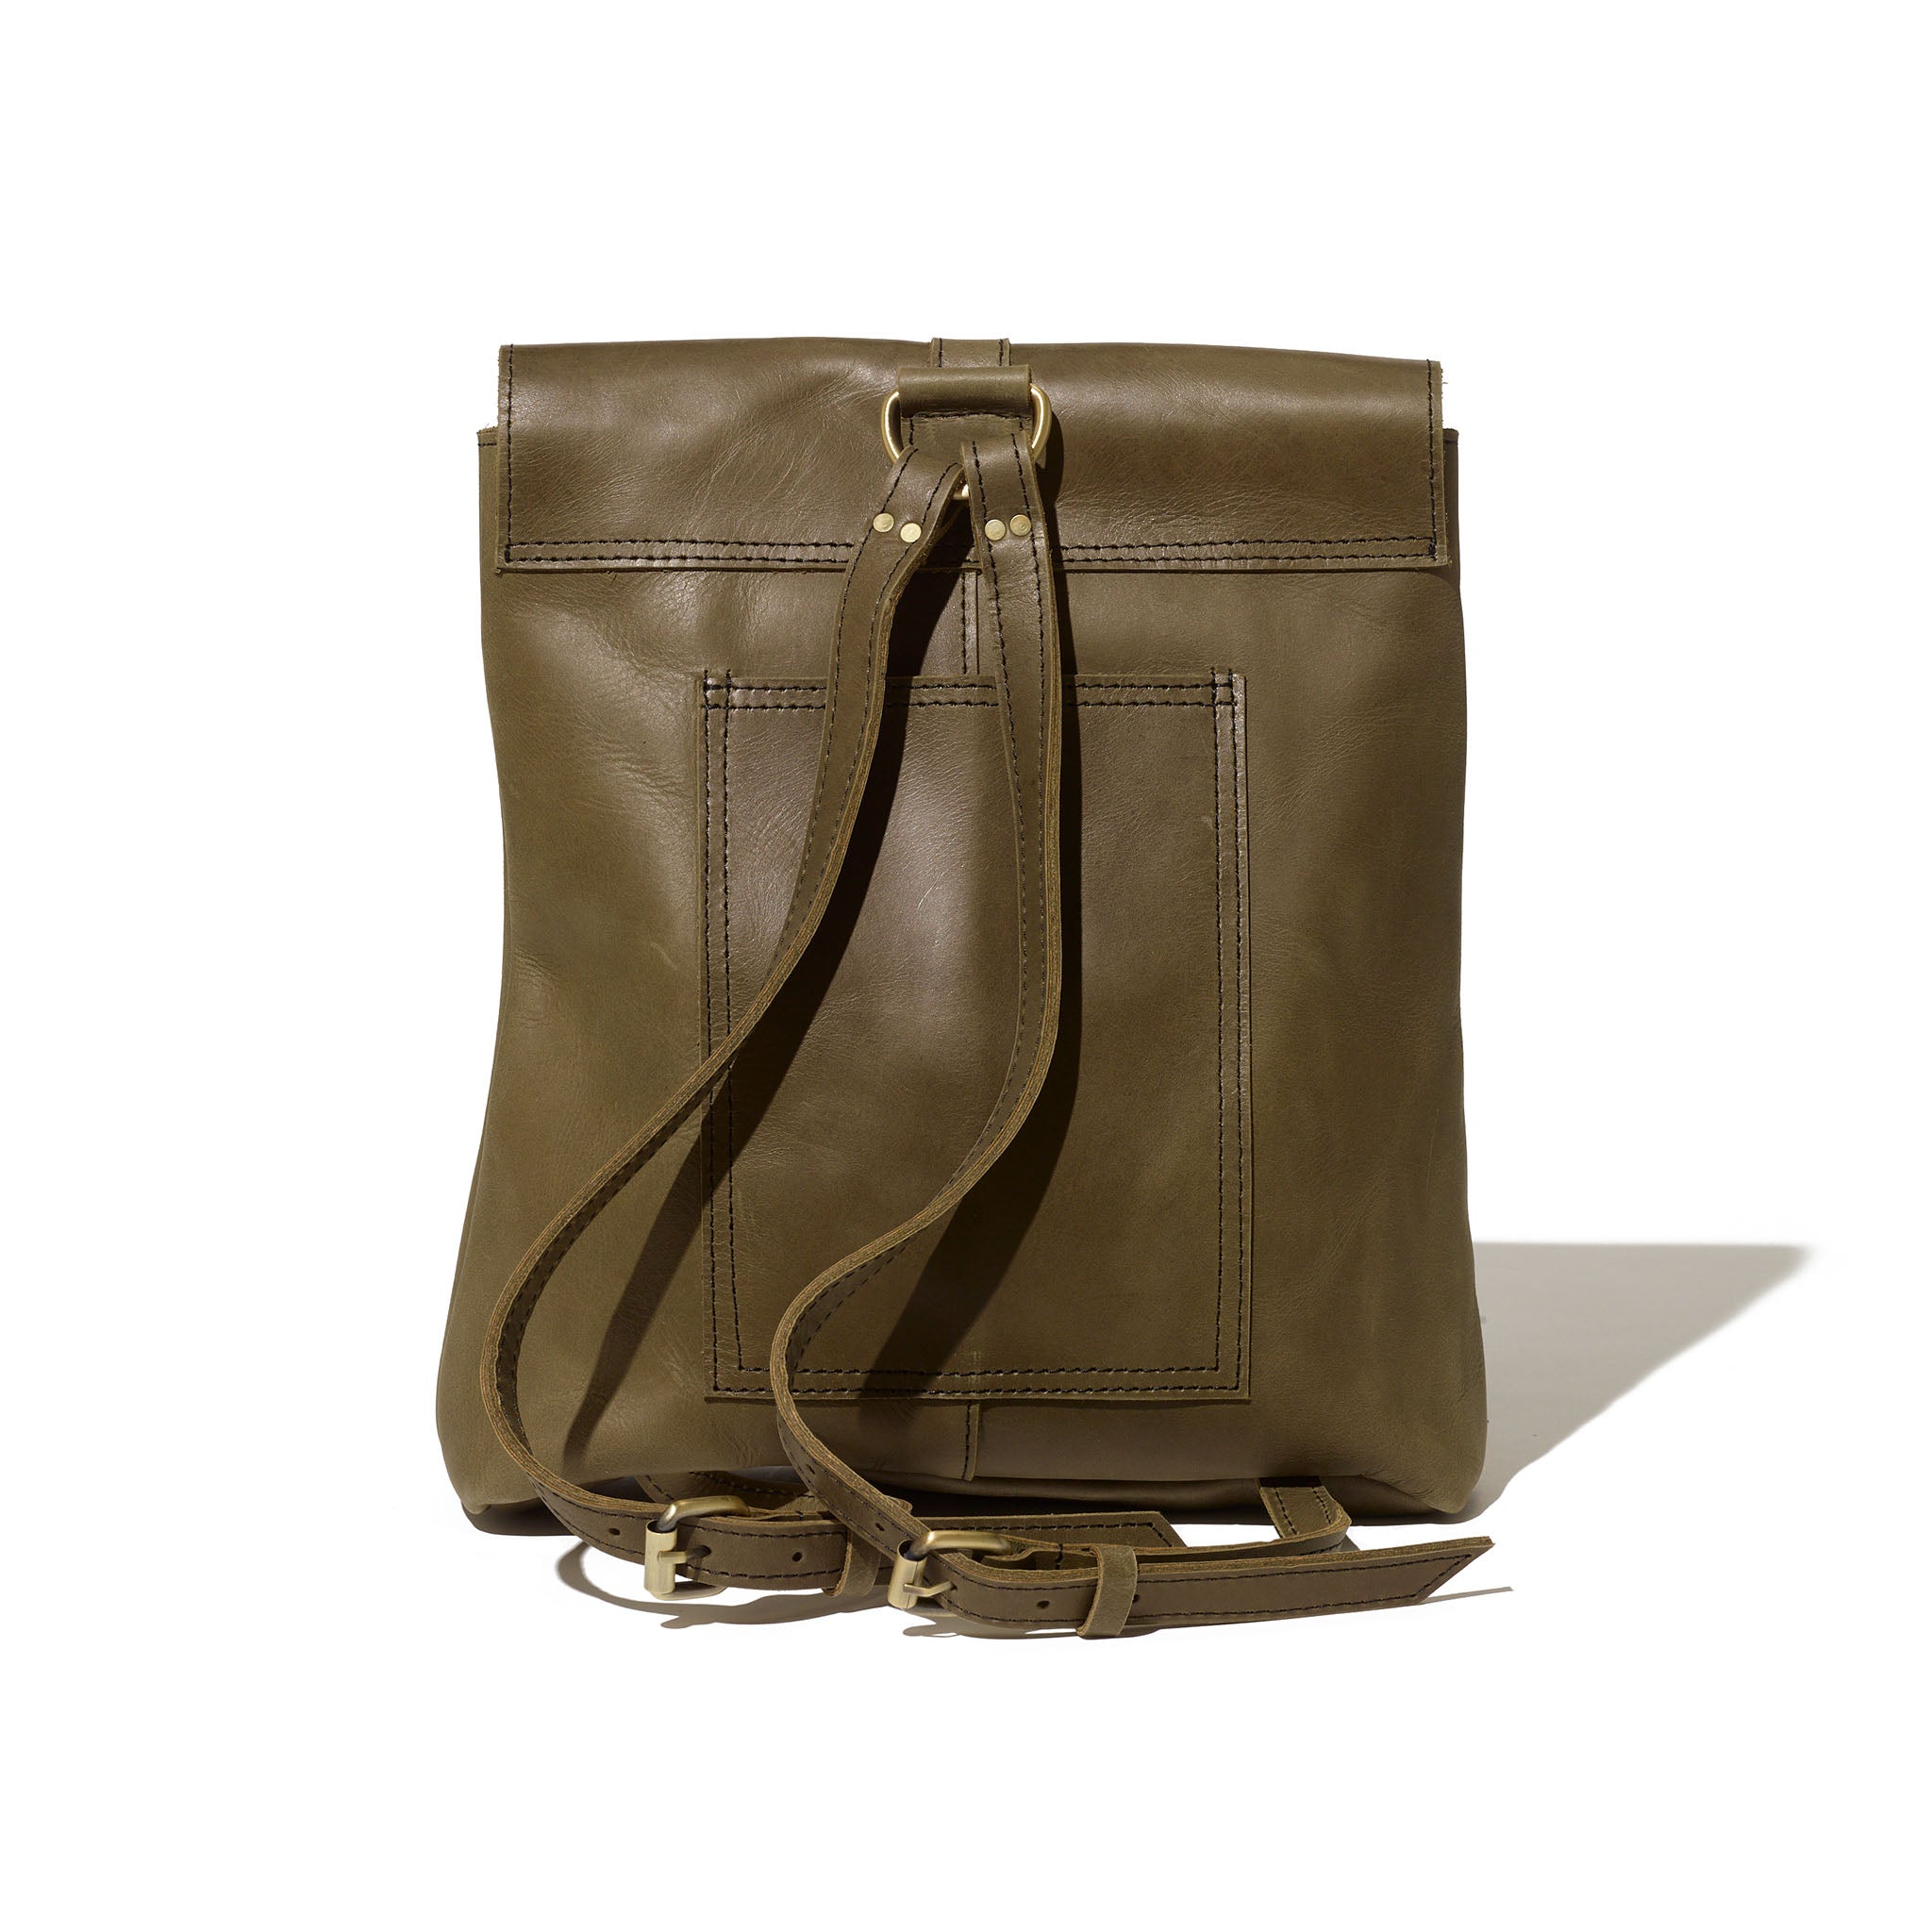 Raven + Lily Addis Backpack - Inca Gold